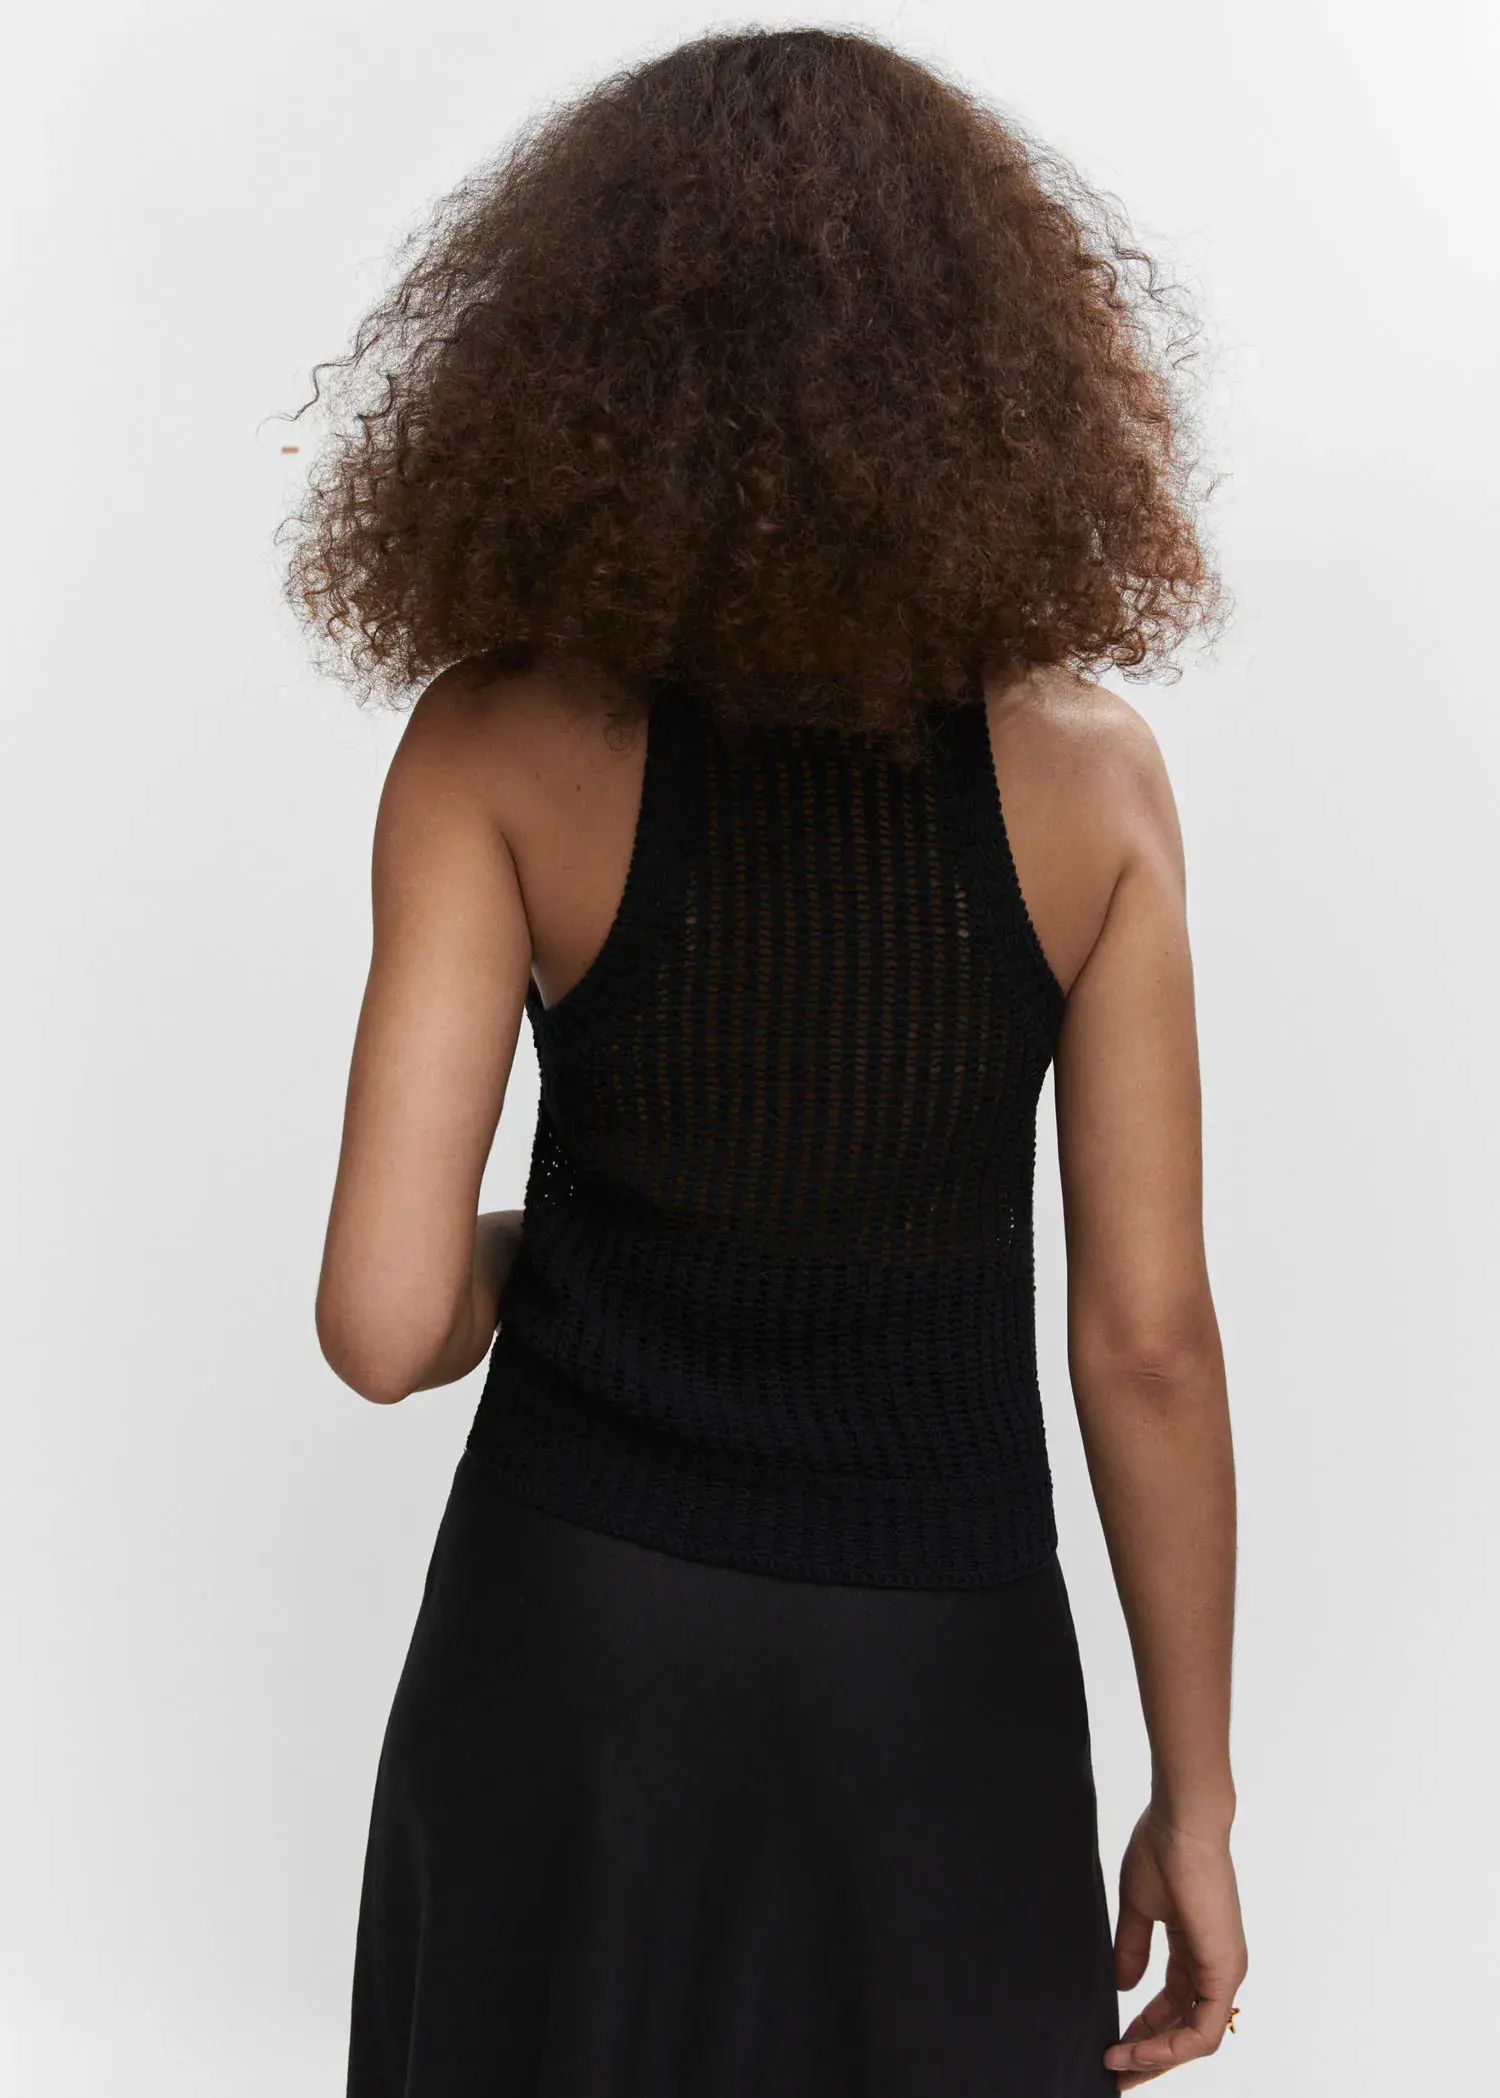 Mango Halter-neck knitted top. a woman with curly hair wearing a black top. 